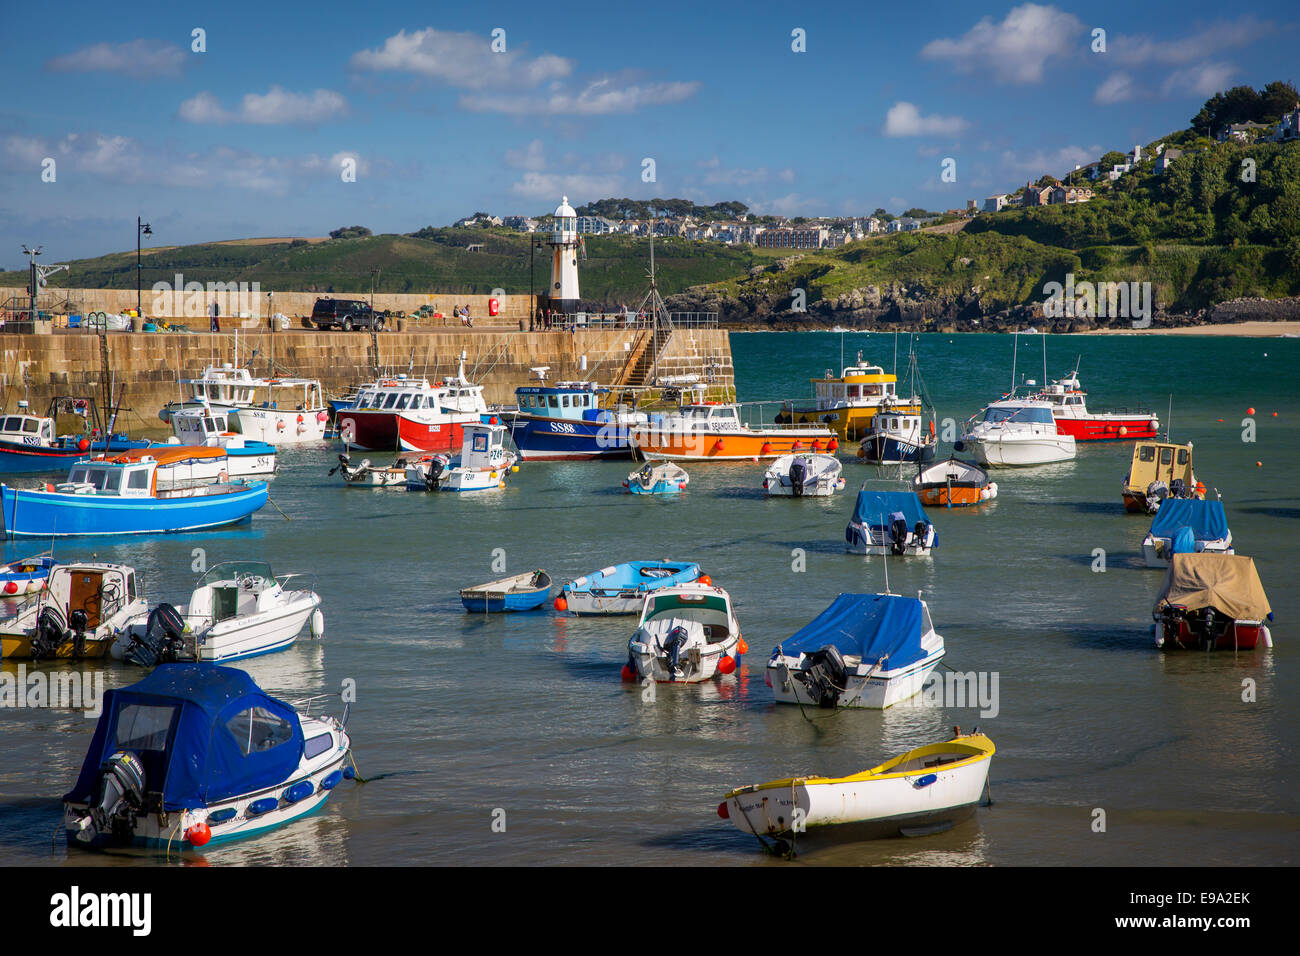 Boats in harbor of St. Ives, Cornwall, England Stock Photo